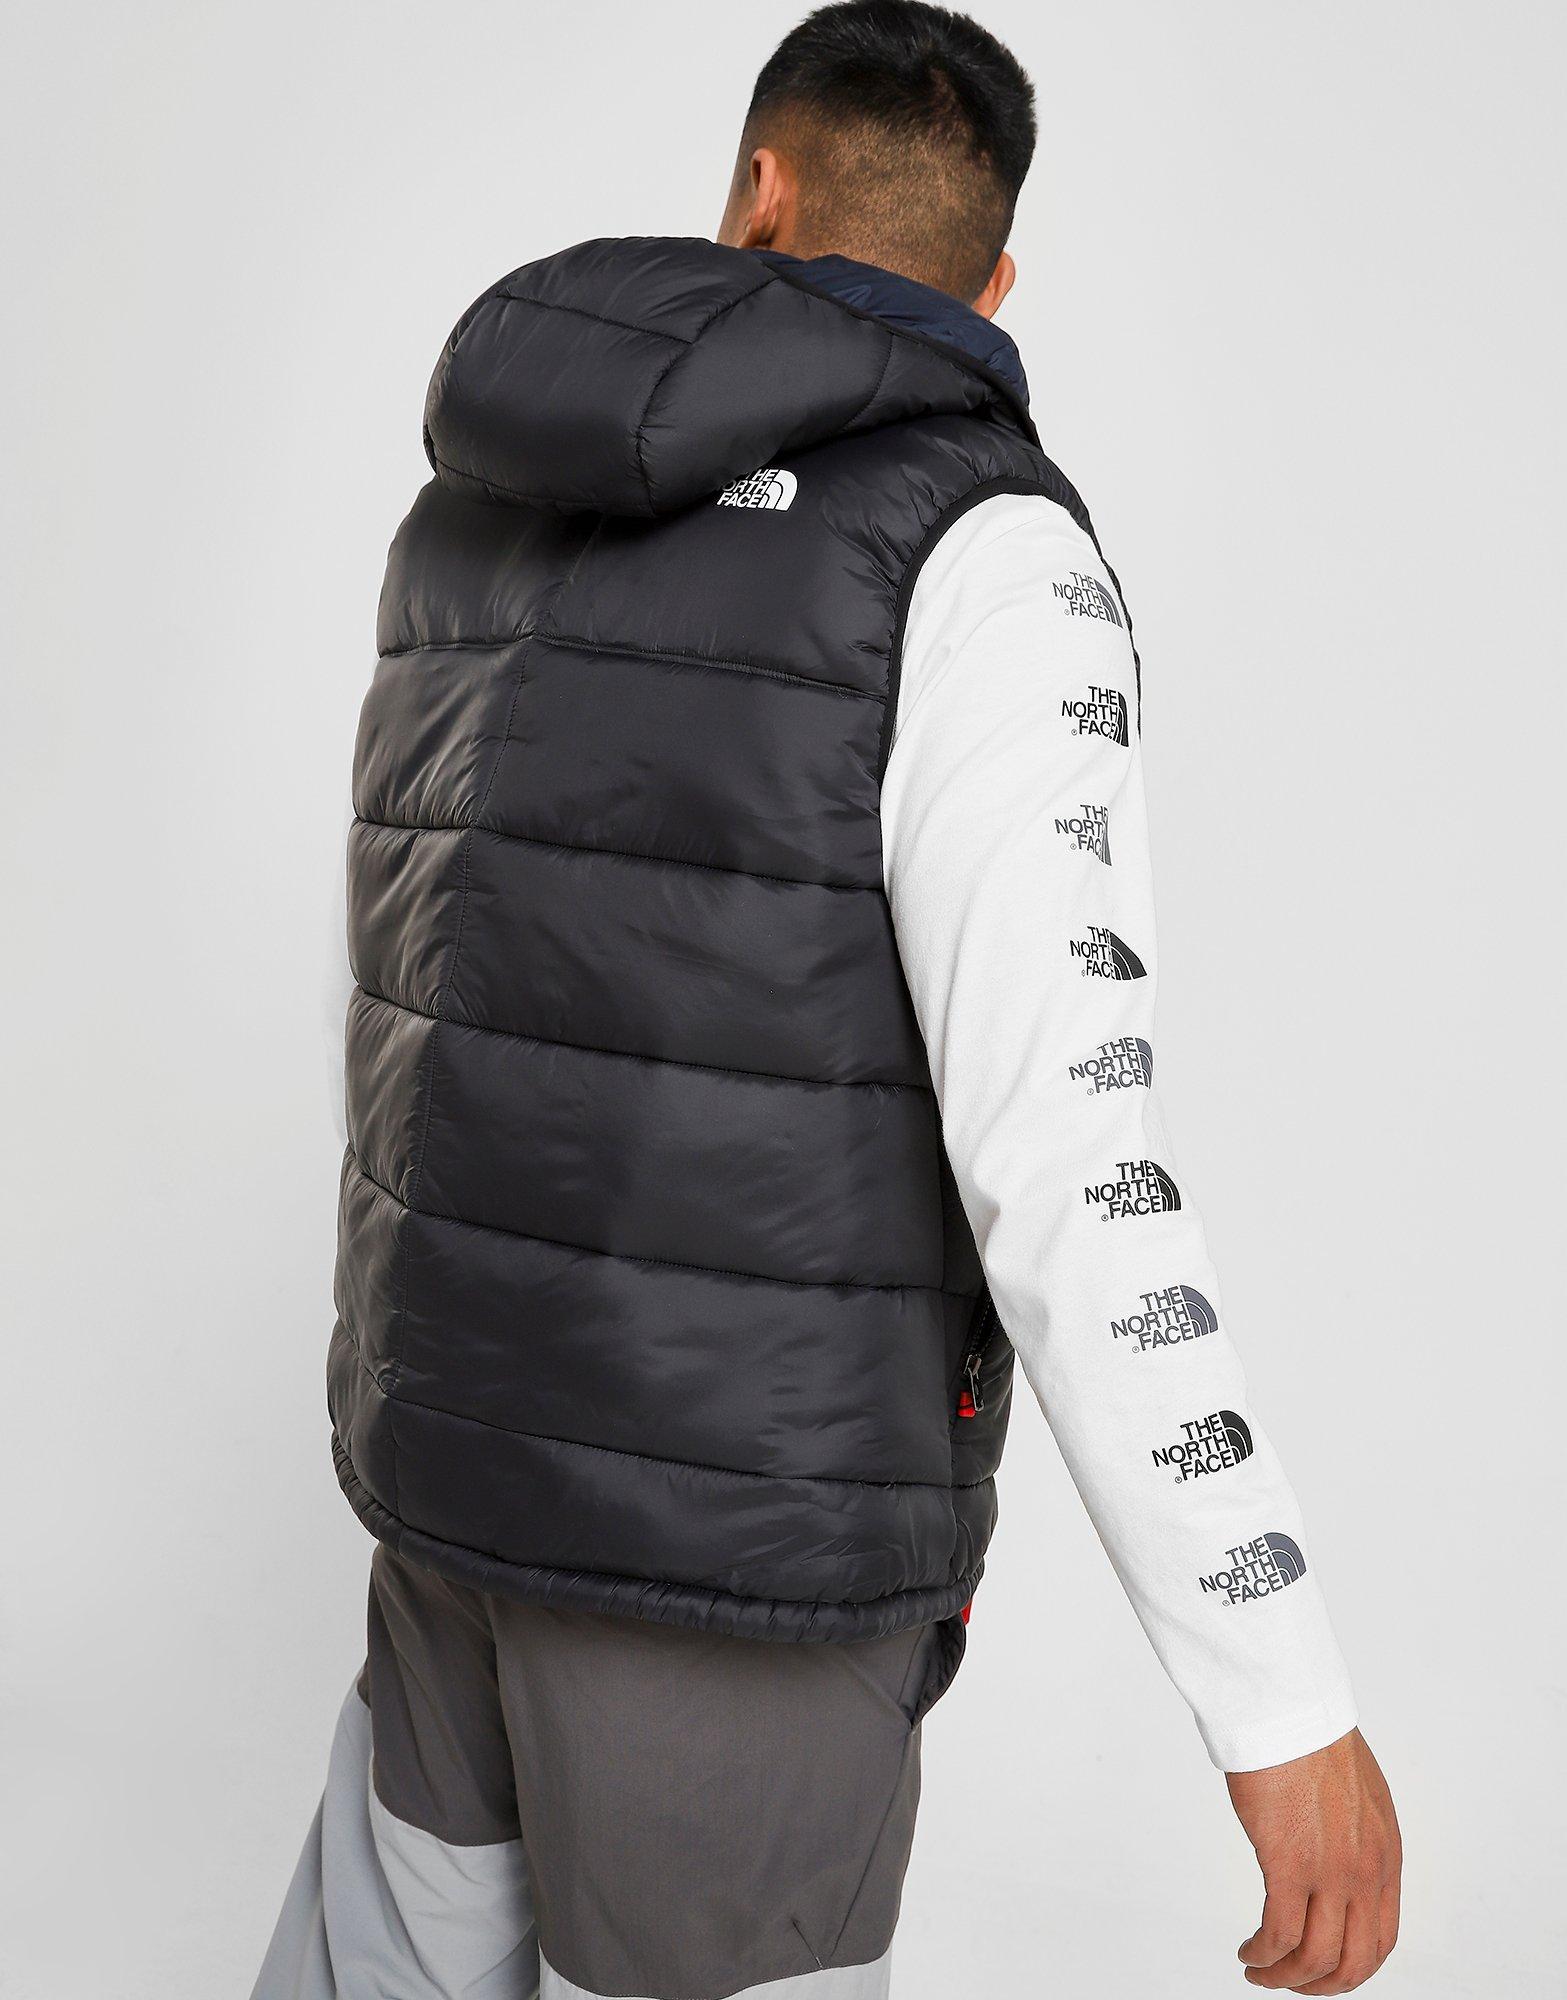 north face hooded body warmer